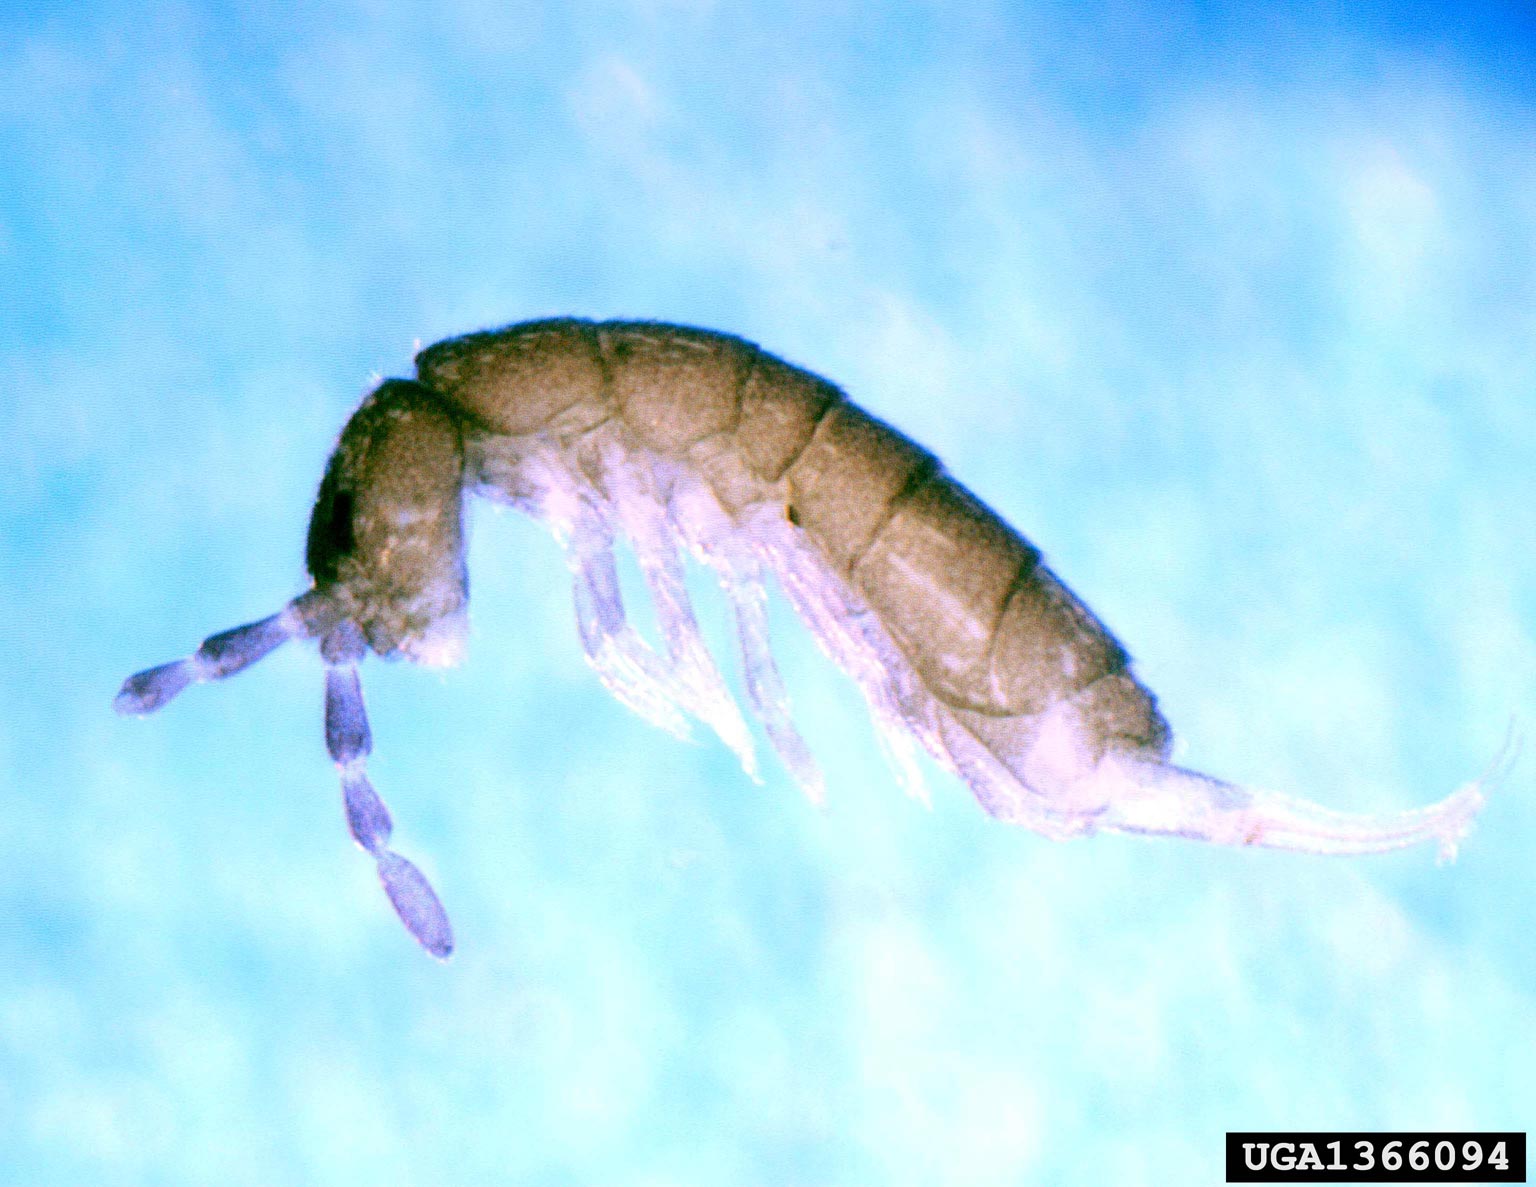 An example of a springtail.